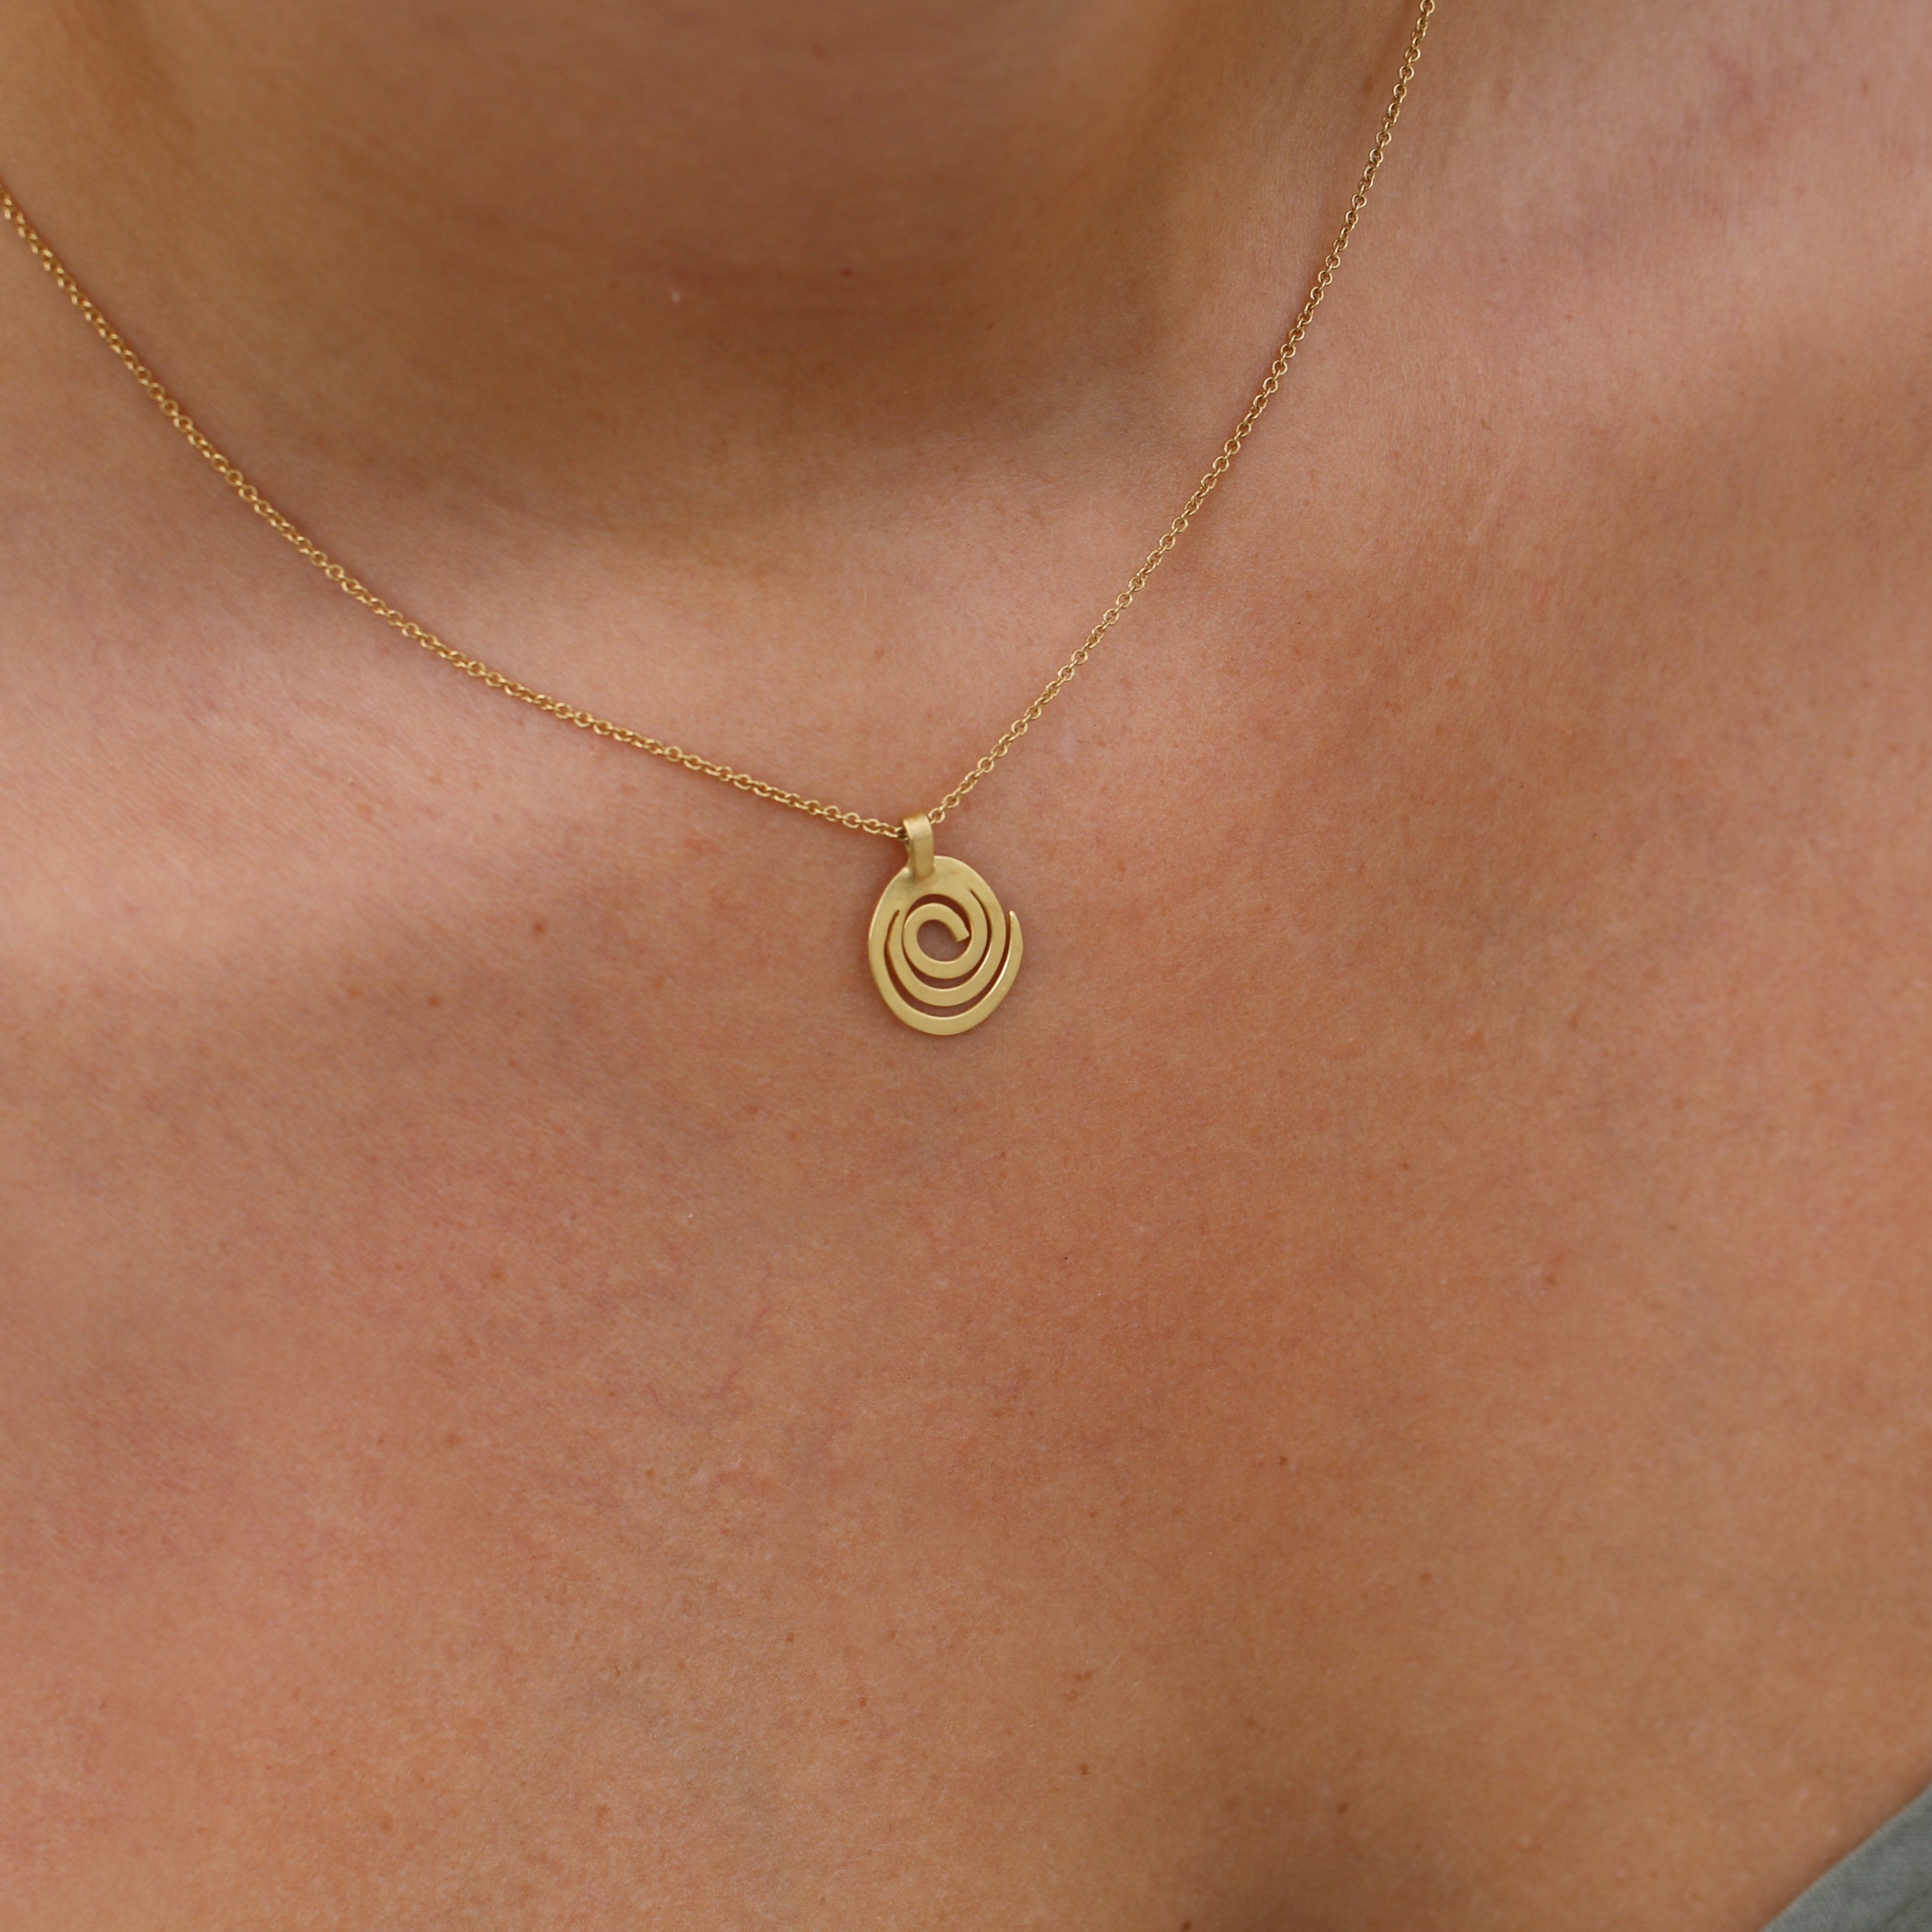 Dainty Silver Spiral Pendant Necklace